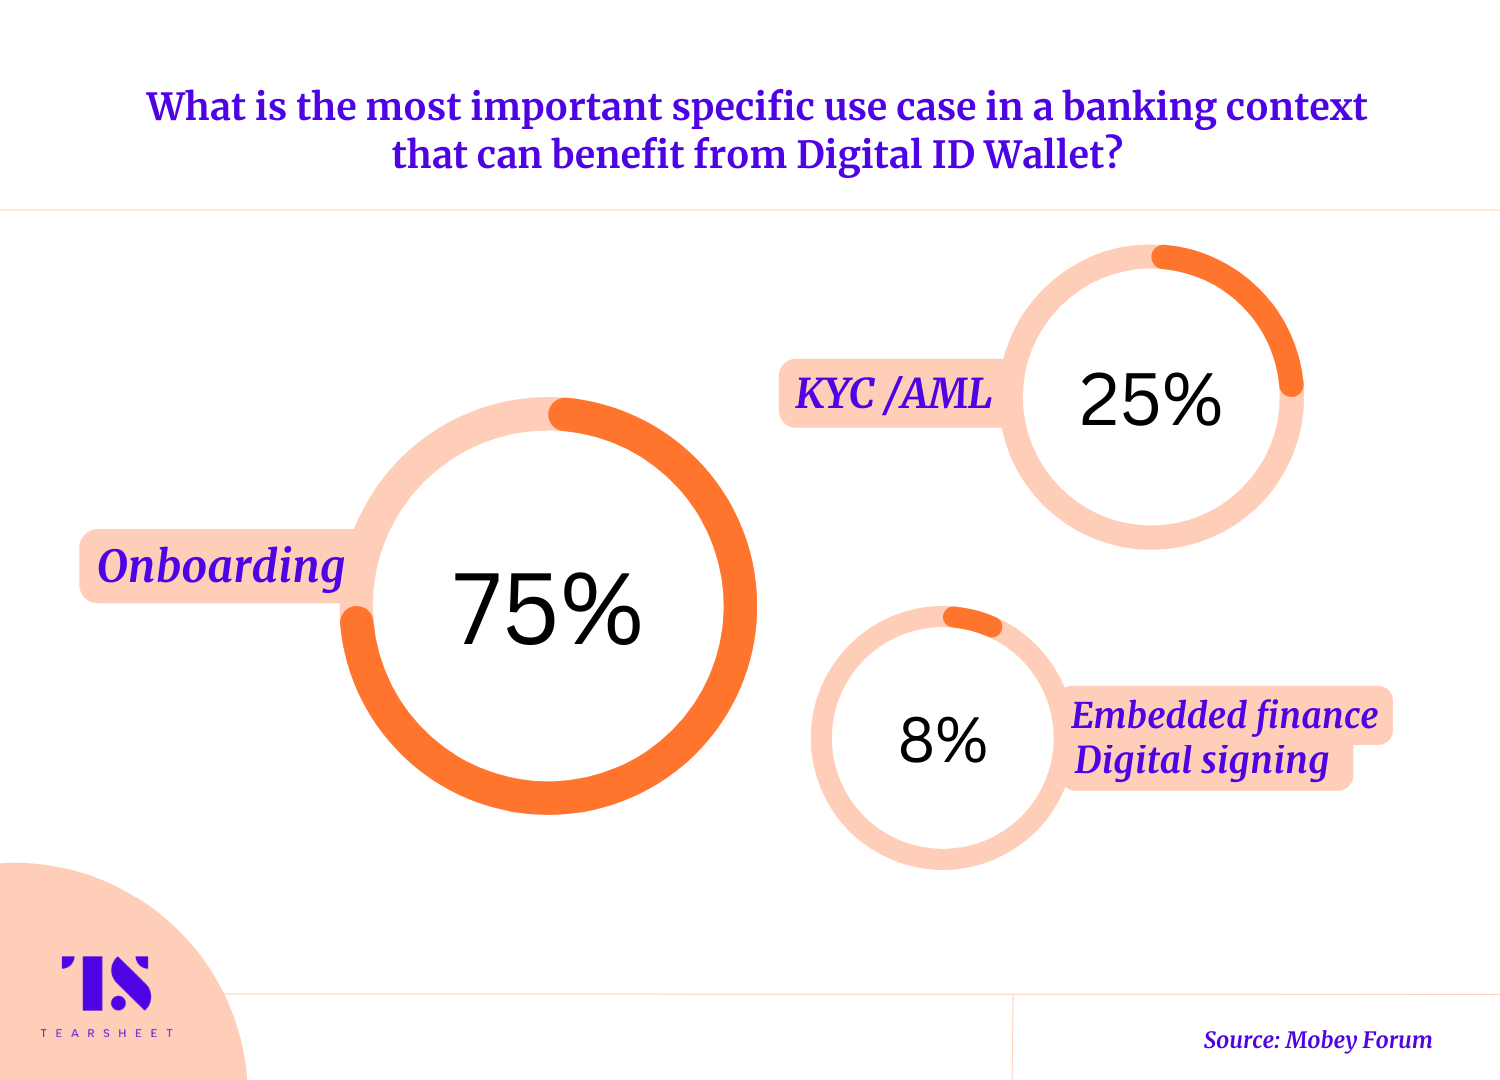 What is the most important specific use case in a banking context that can benefit from Digital Identity Wallet?